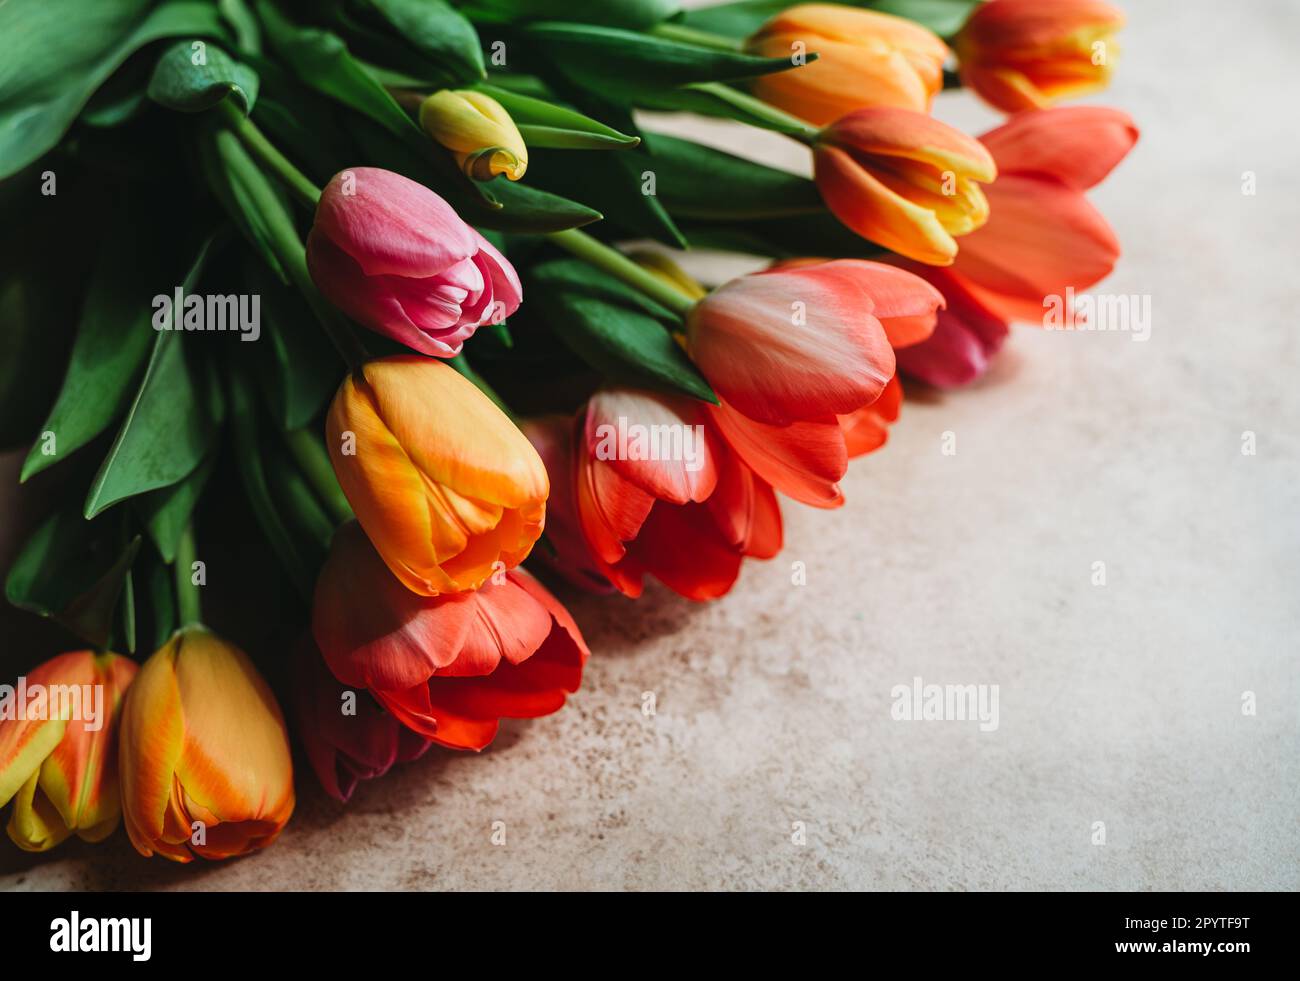 Close up view of colorful bunch of cut tulip flowers on beige surface. Stock Photo